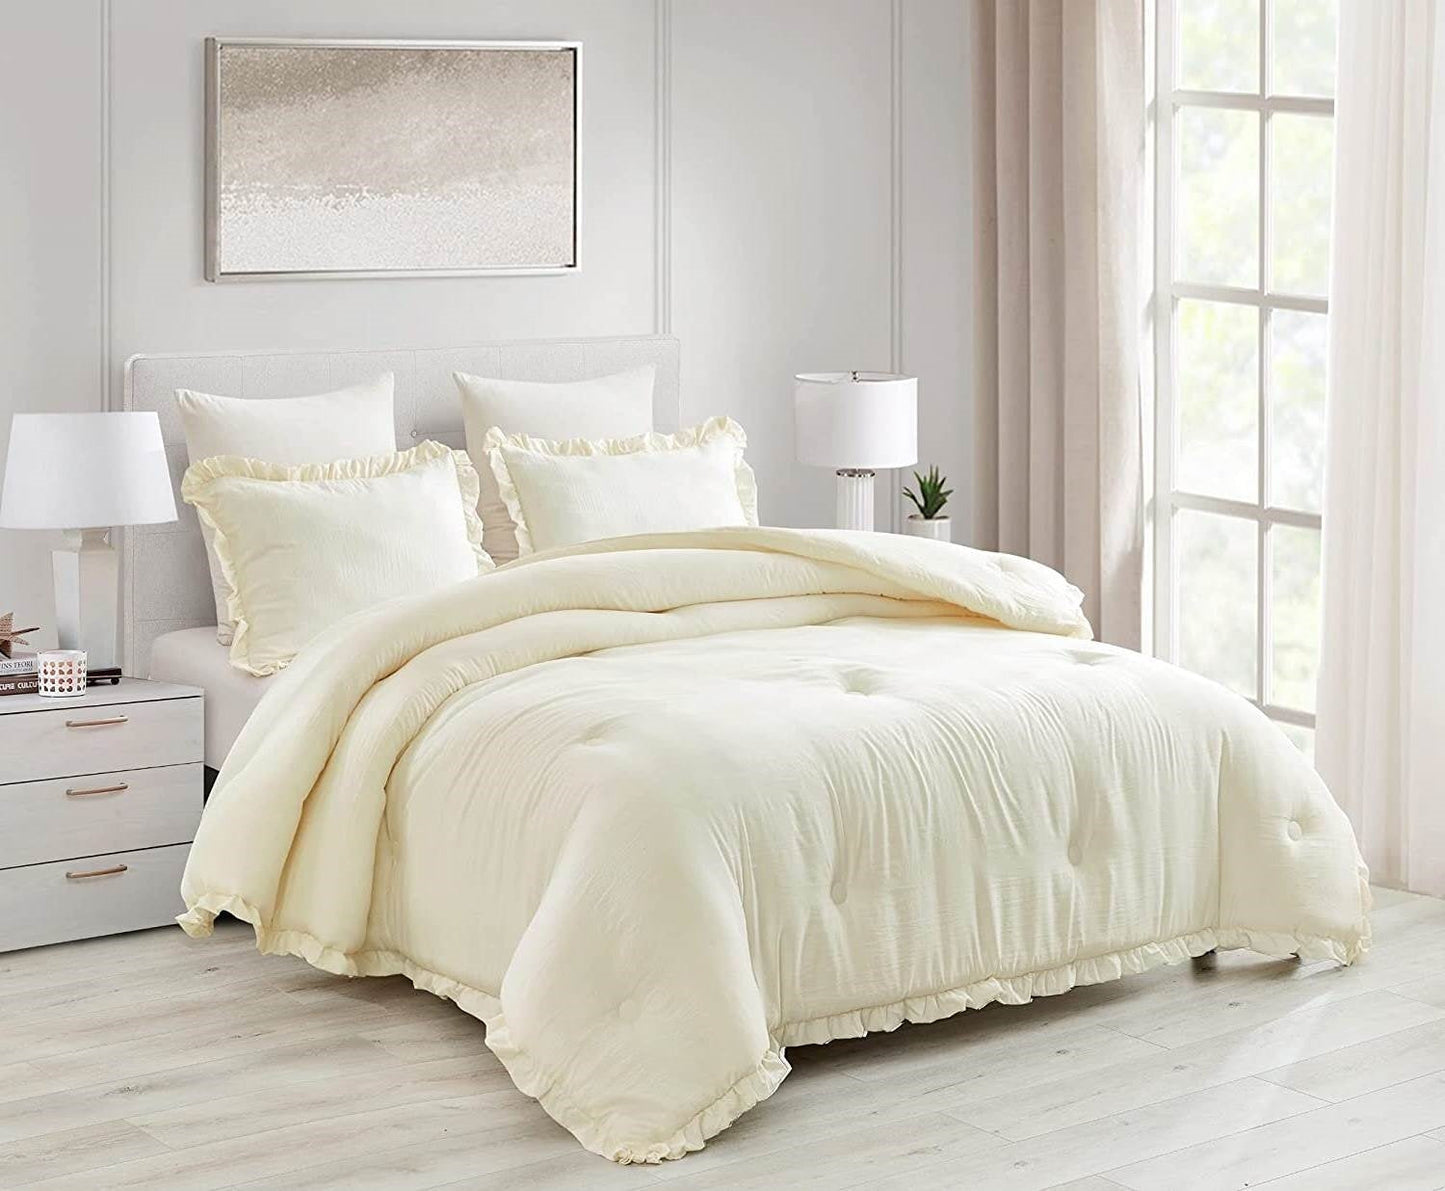 Bedroom > Comforters And Sets - Oversized King Ivory Microfiber 3-Piece Comforter Set With Ruffled Edge Trim